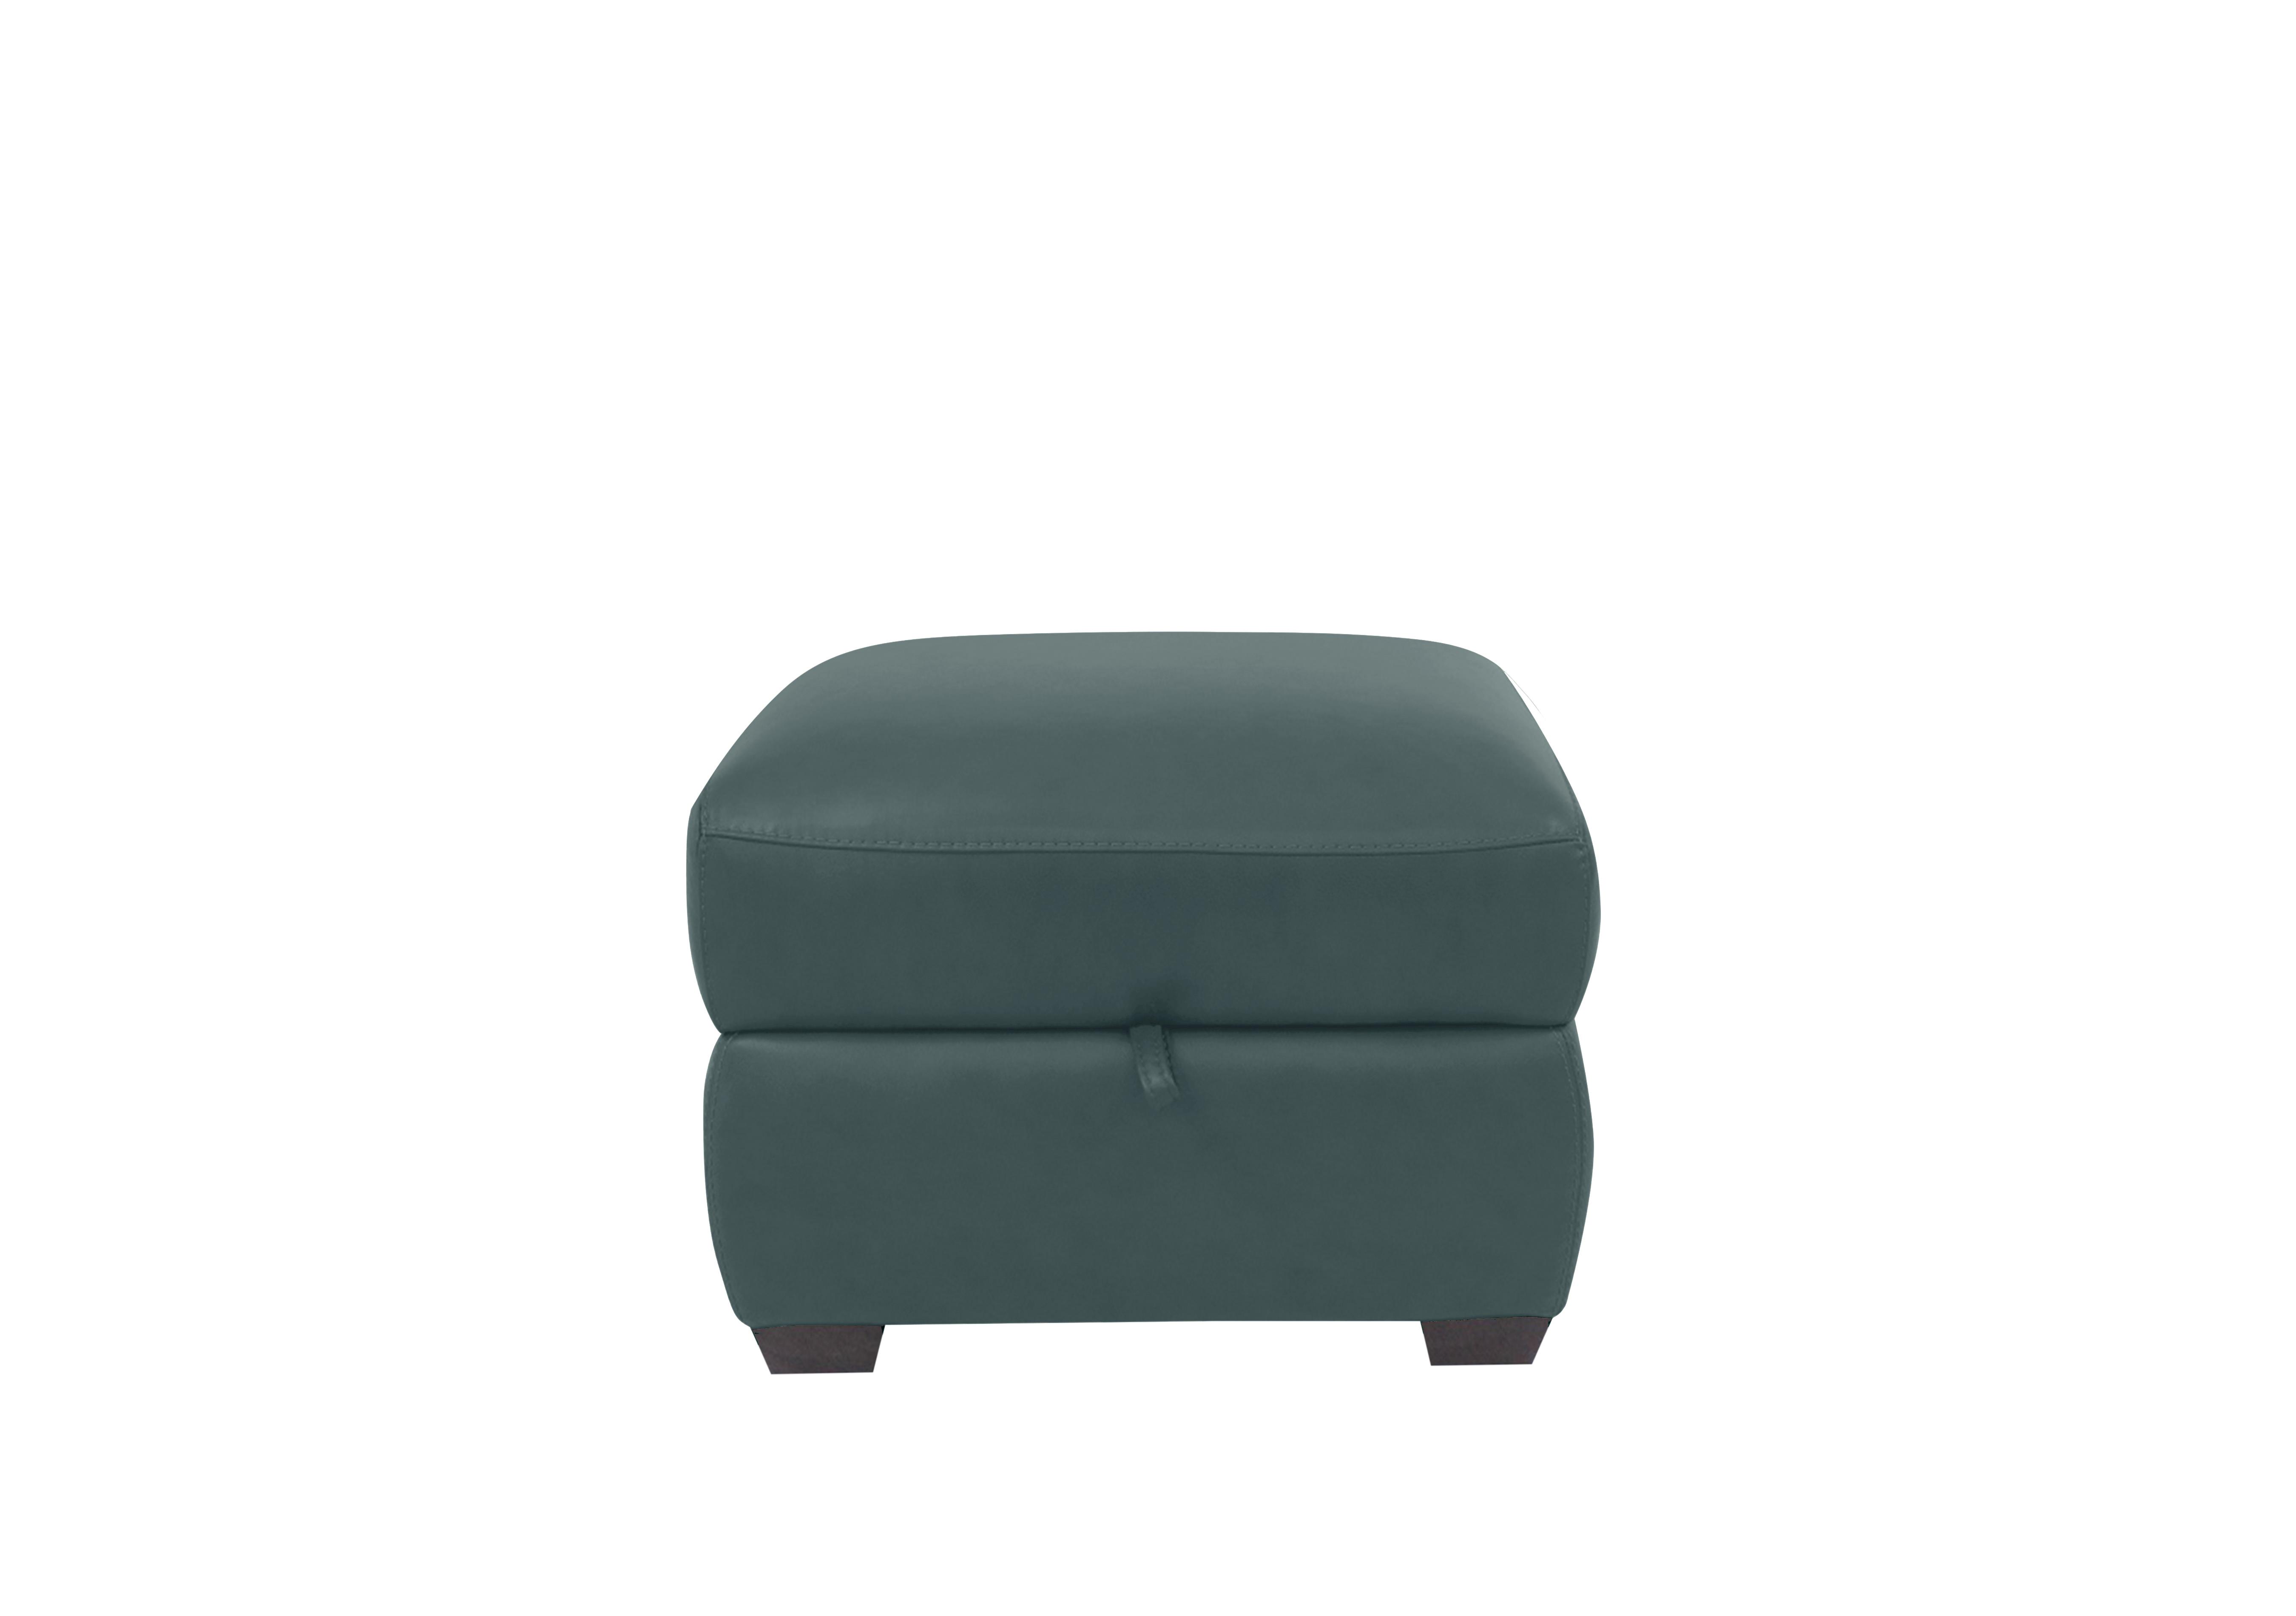 Cozee Leather Storage Stool in Bv-301e Lake Green on Furniture Village